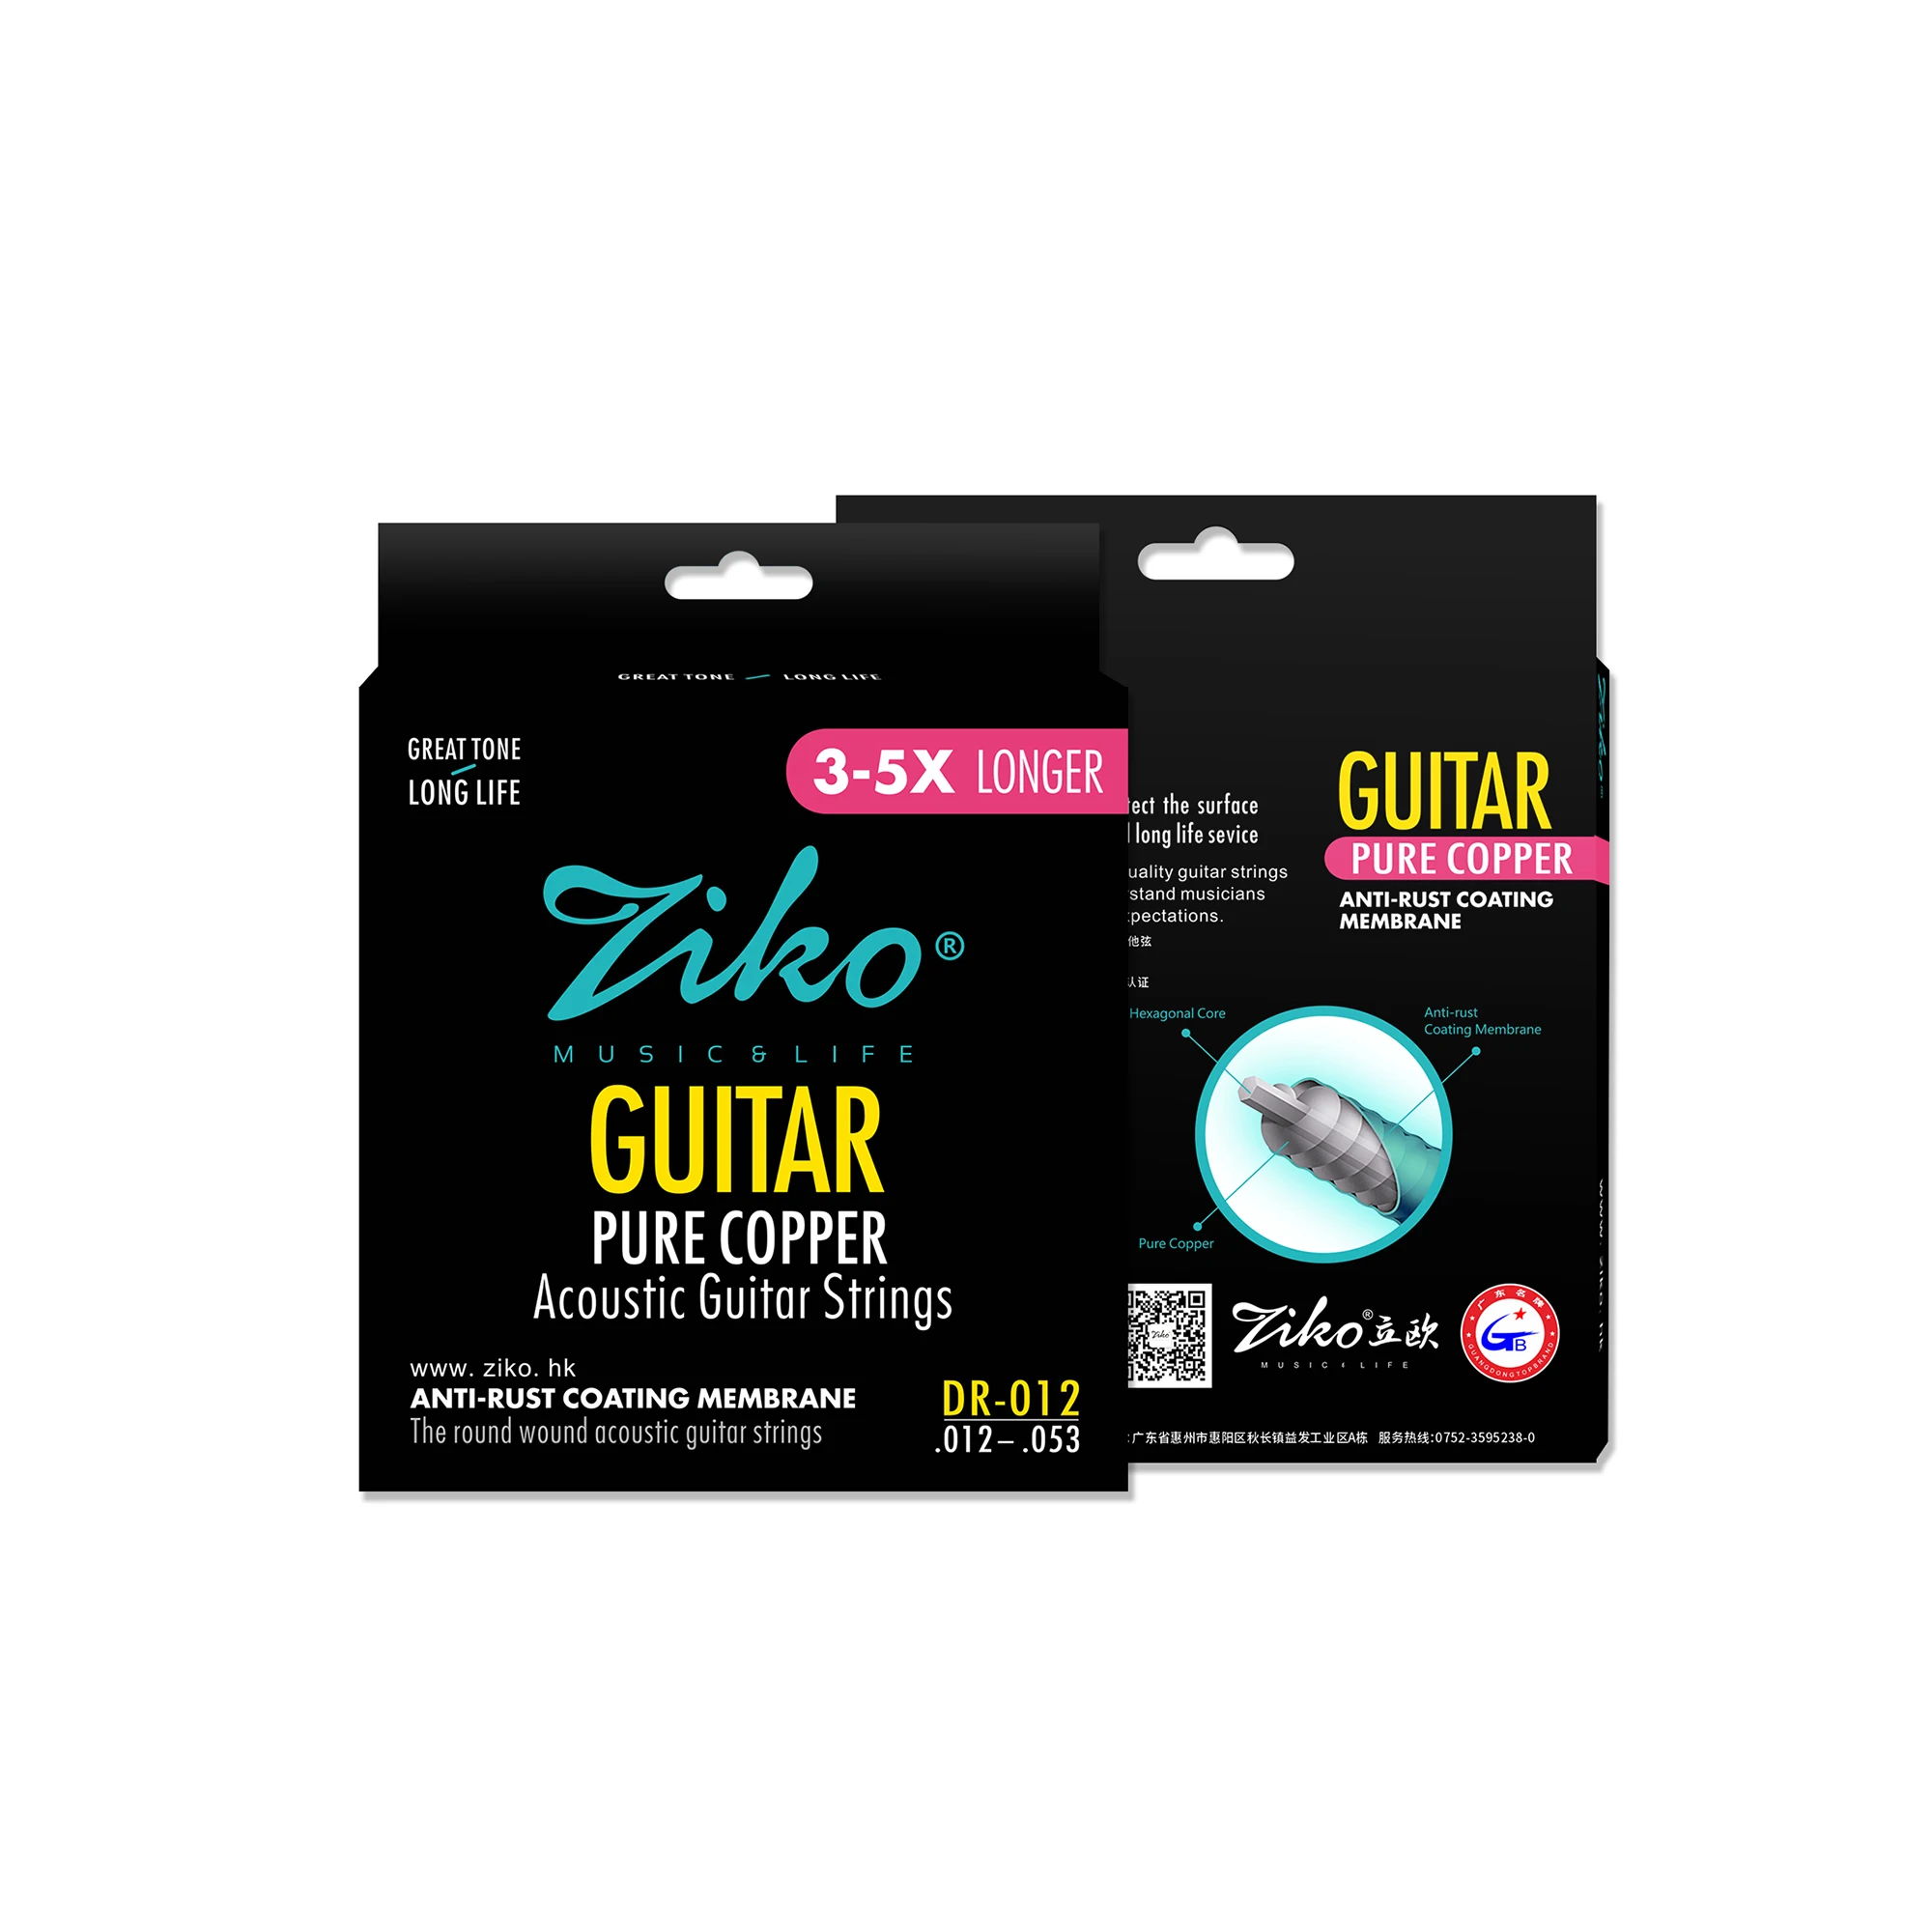 ZIKO DR-012 Acoustic Guitar Strings Hexagonal Steel Core Red Copper Alloy Wound Guitarra Strings Folk Guitar Parts & Accessories ziko acoustic guitar strings stainless steel high quality wire string copper alloy wound strings guitar accessories